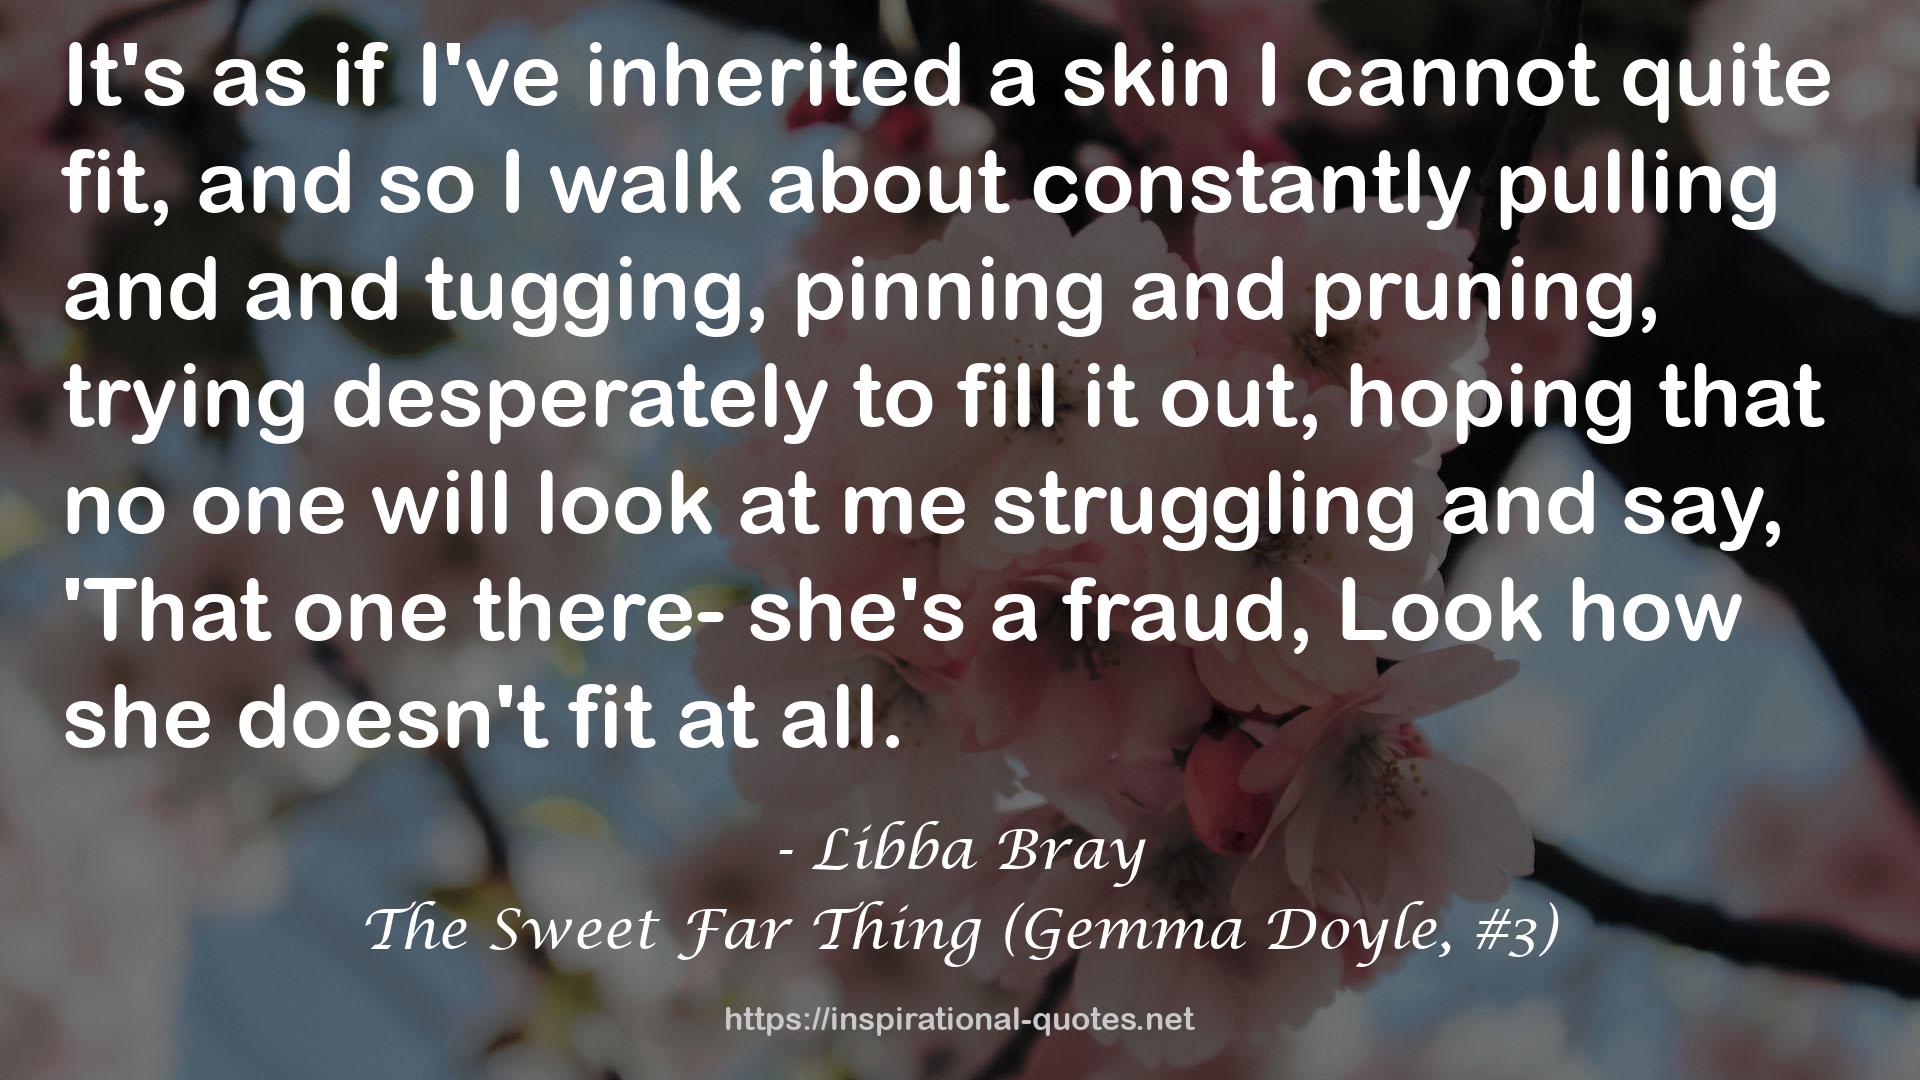 The Sweet Far Thing (Gemma Doyle, #3) QUOTES